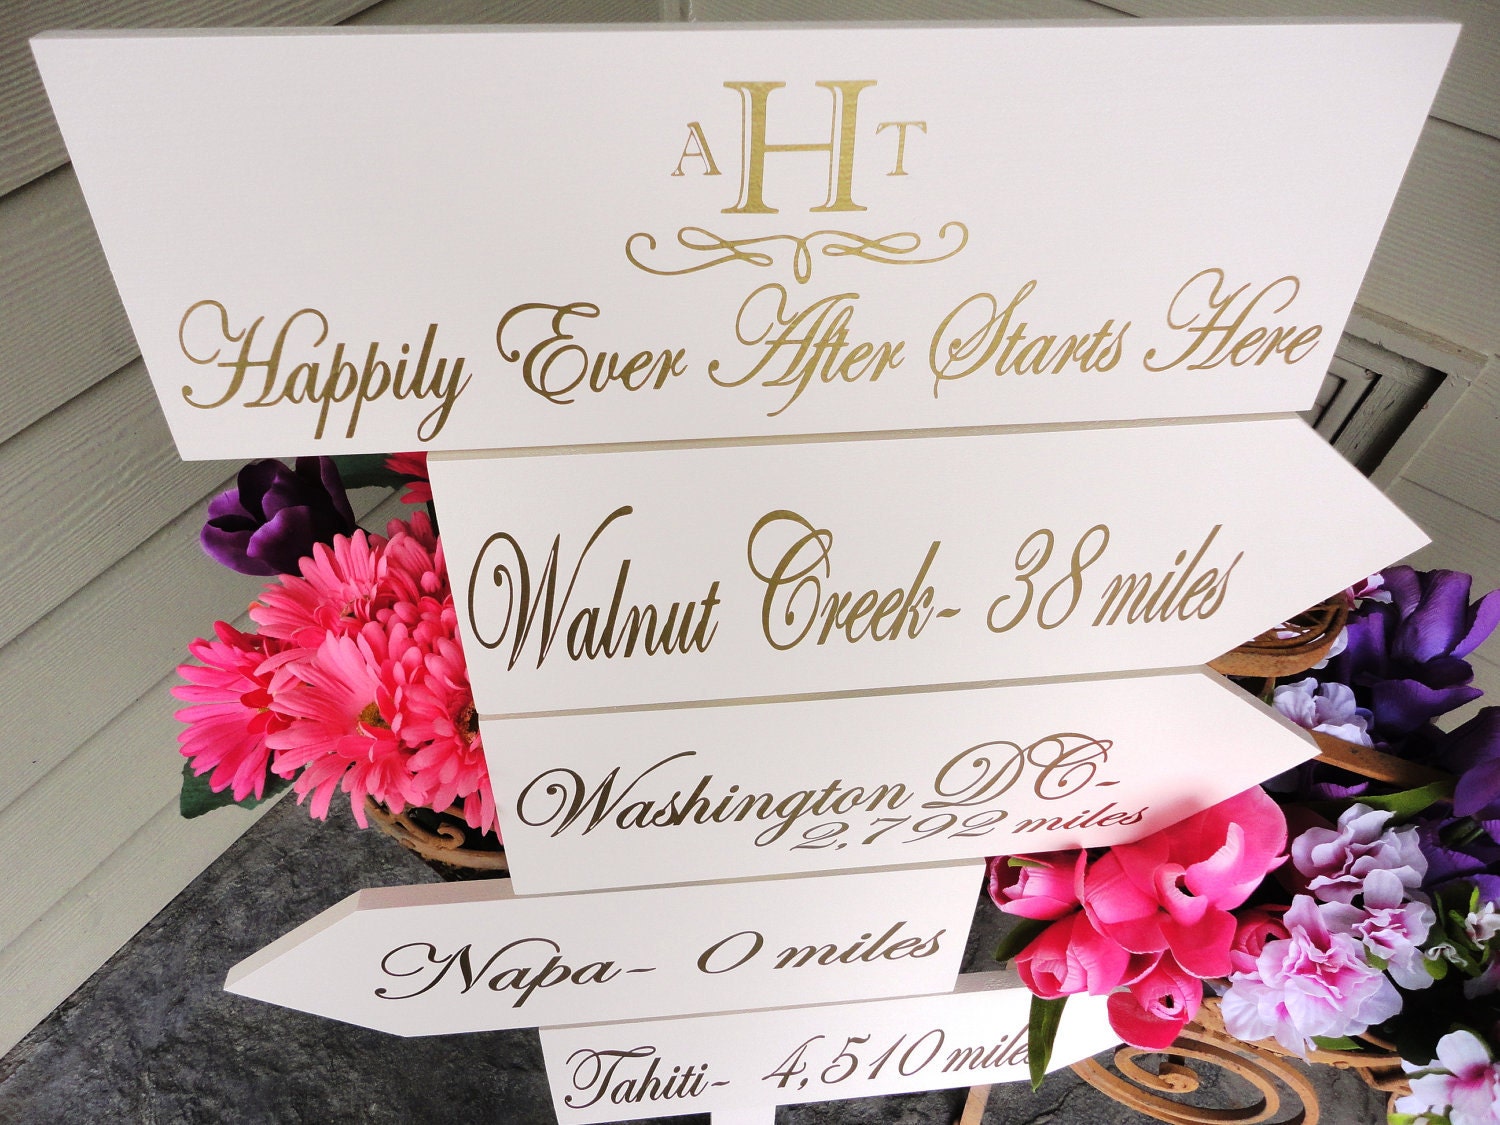 Personalized Wood Directional Arrow Signs with Cities and Miles with Monogram. Happily Ever After Starts Here.